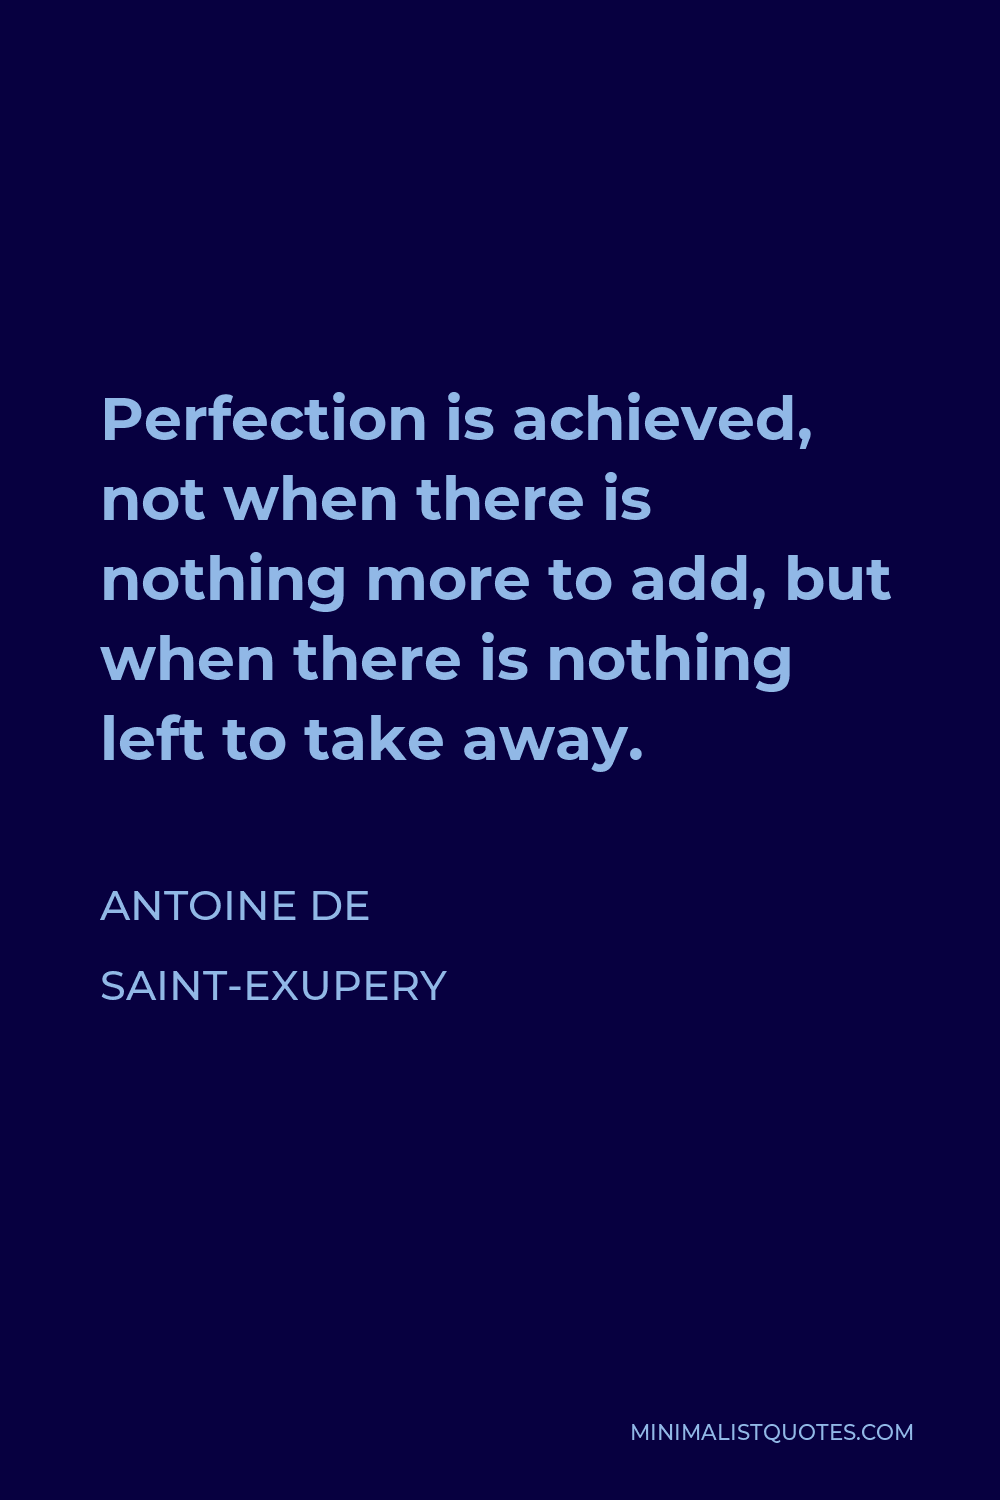 Antoine de Saint-Exupery Quote - Perfection is achieved, not when there is nothing more to add, but when there is nothing left to take away.